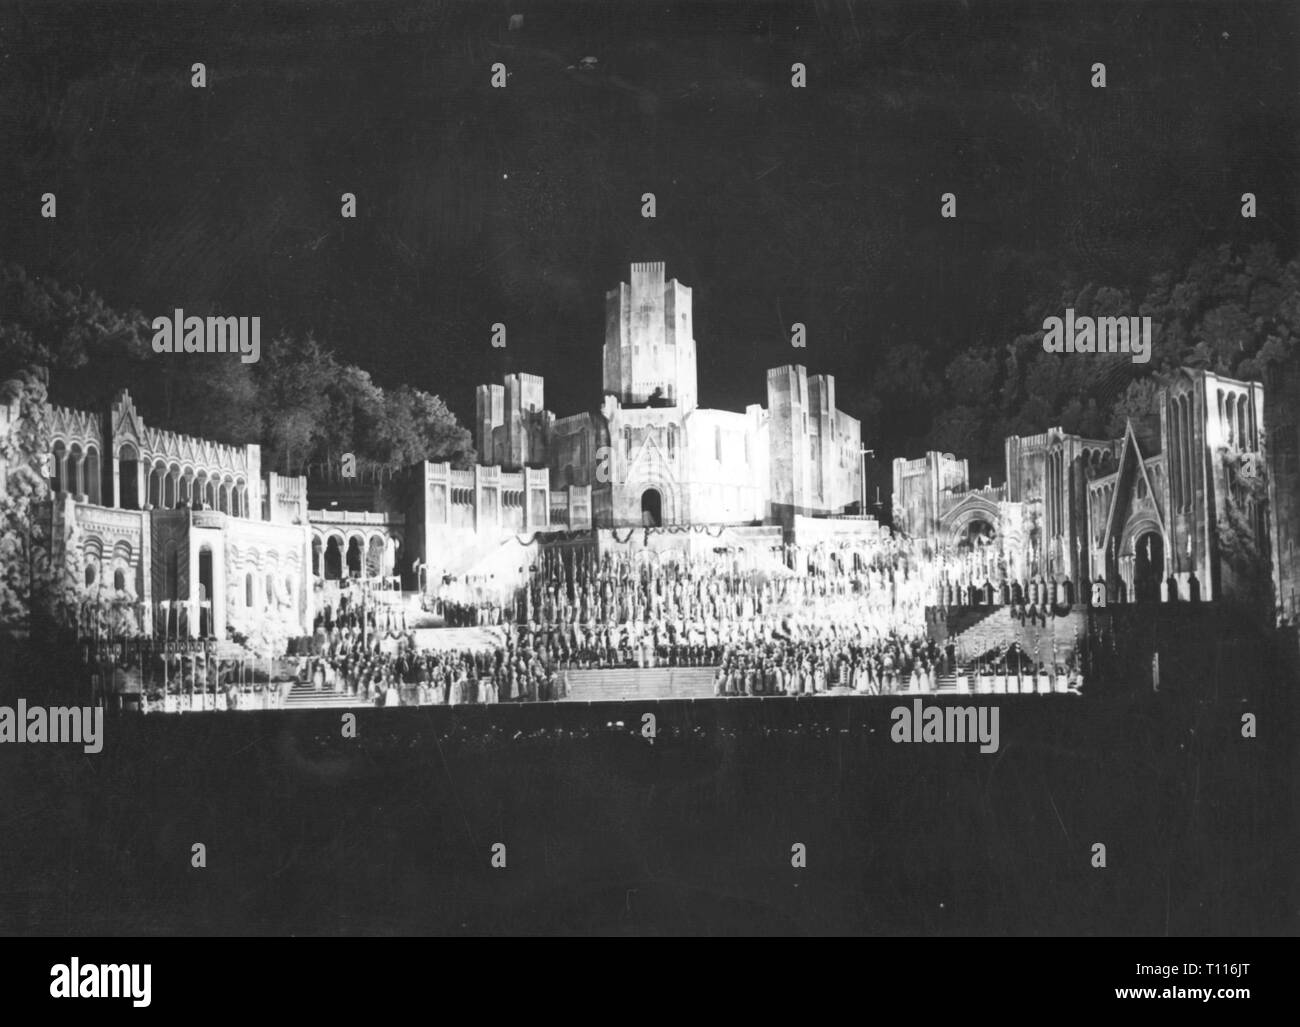 Theater/Theater, Oper, "Lohengrin", Komponist: Richard Wagner, Leistung, 2. Akt, Foro Mussolini, Rom, auf Ocassion des Besuchs von Adolf Hitler, 9.5.1938, Additional-Rights - Clearance-Info - Not-Available Stockfoto